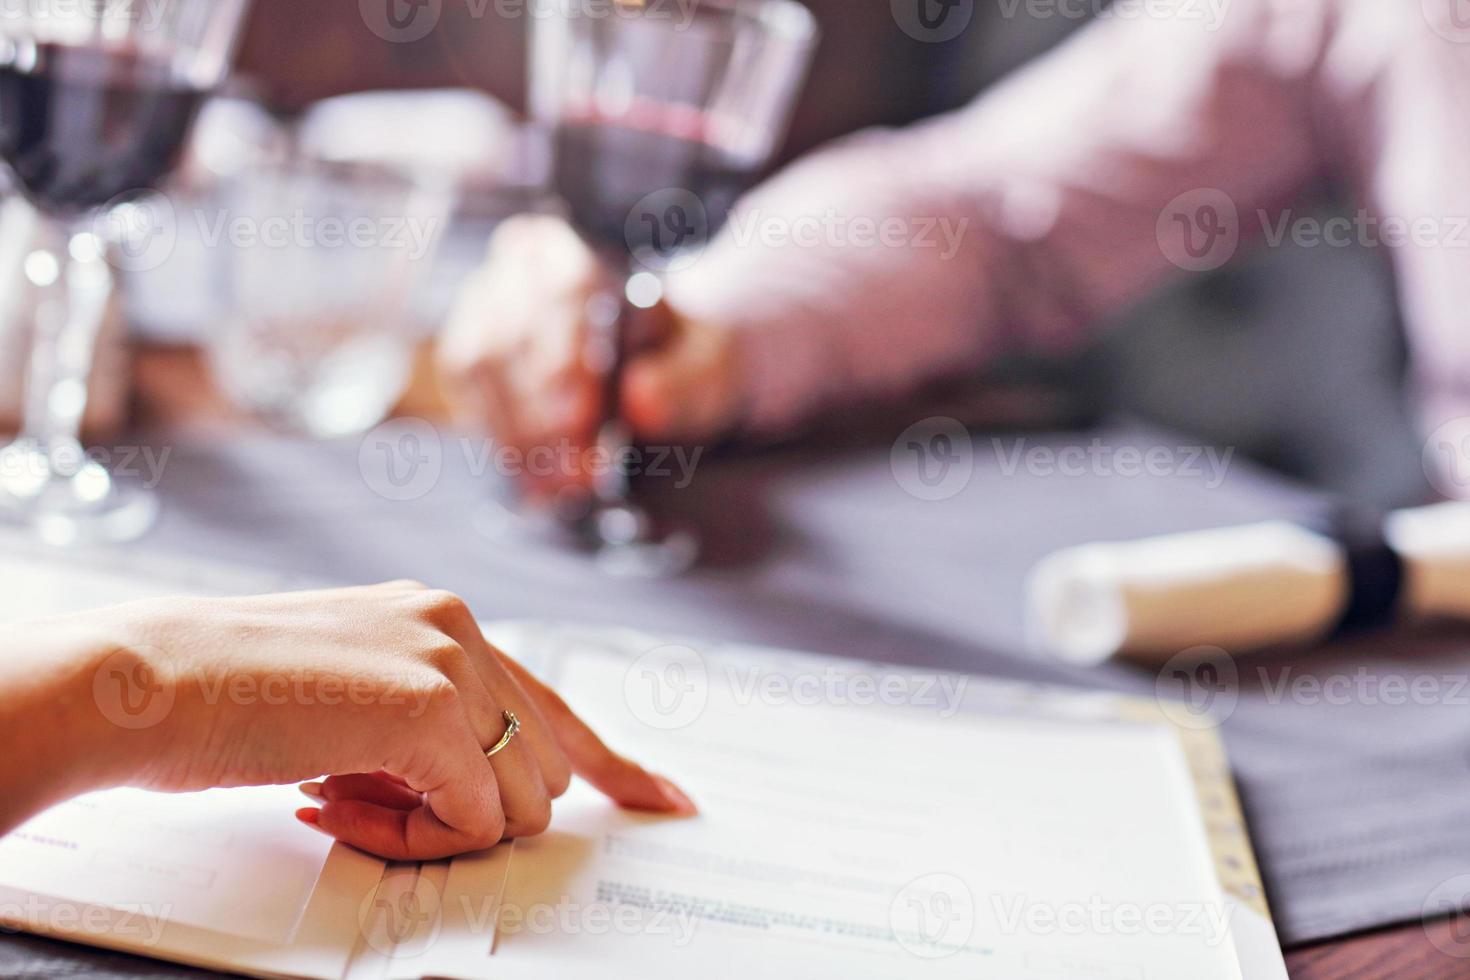 Romantic couple dating in restaurant and ordering from menu photo